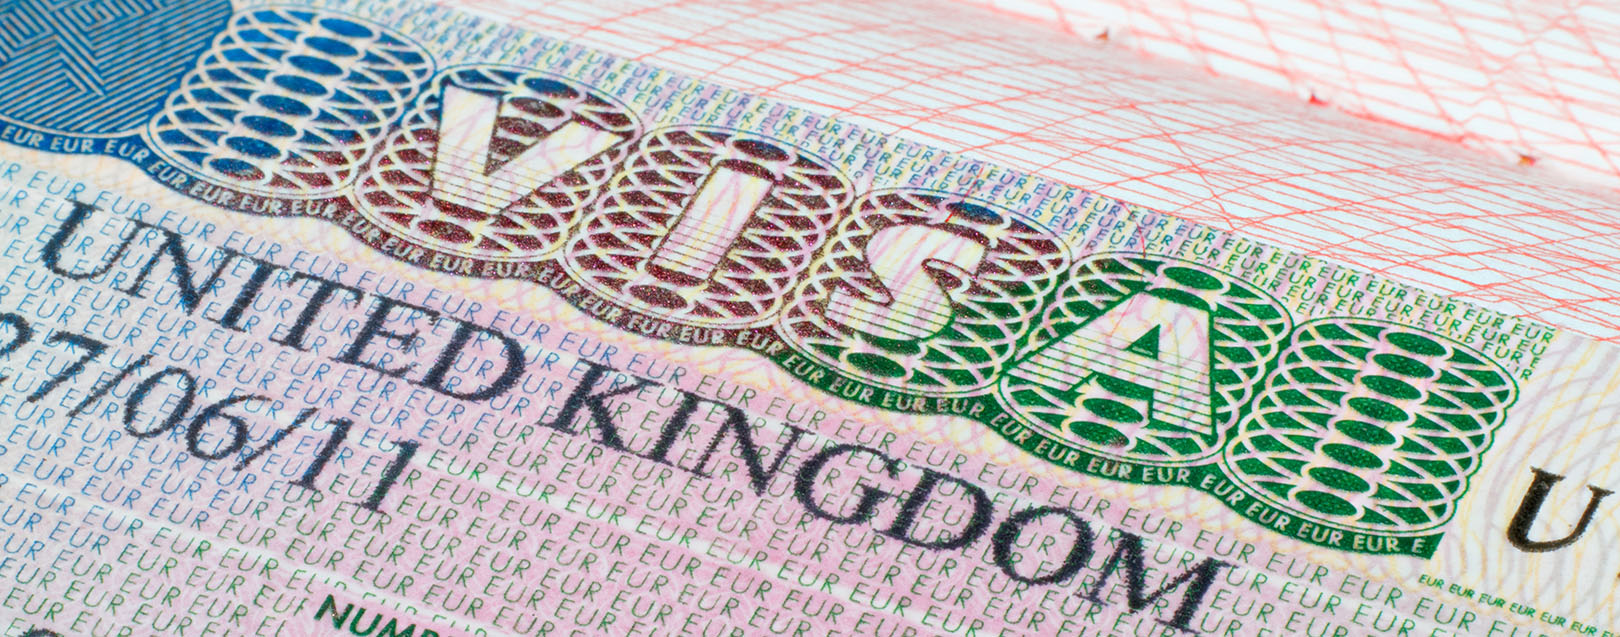 57% UK work visas issued to Indians in 2016